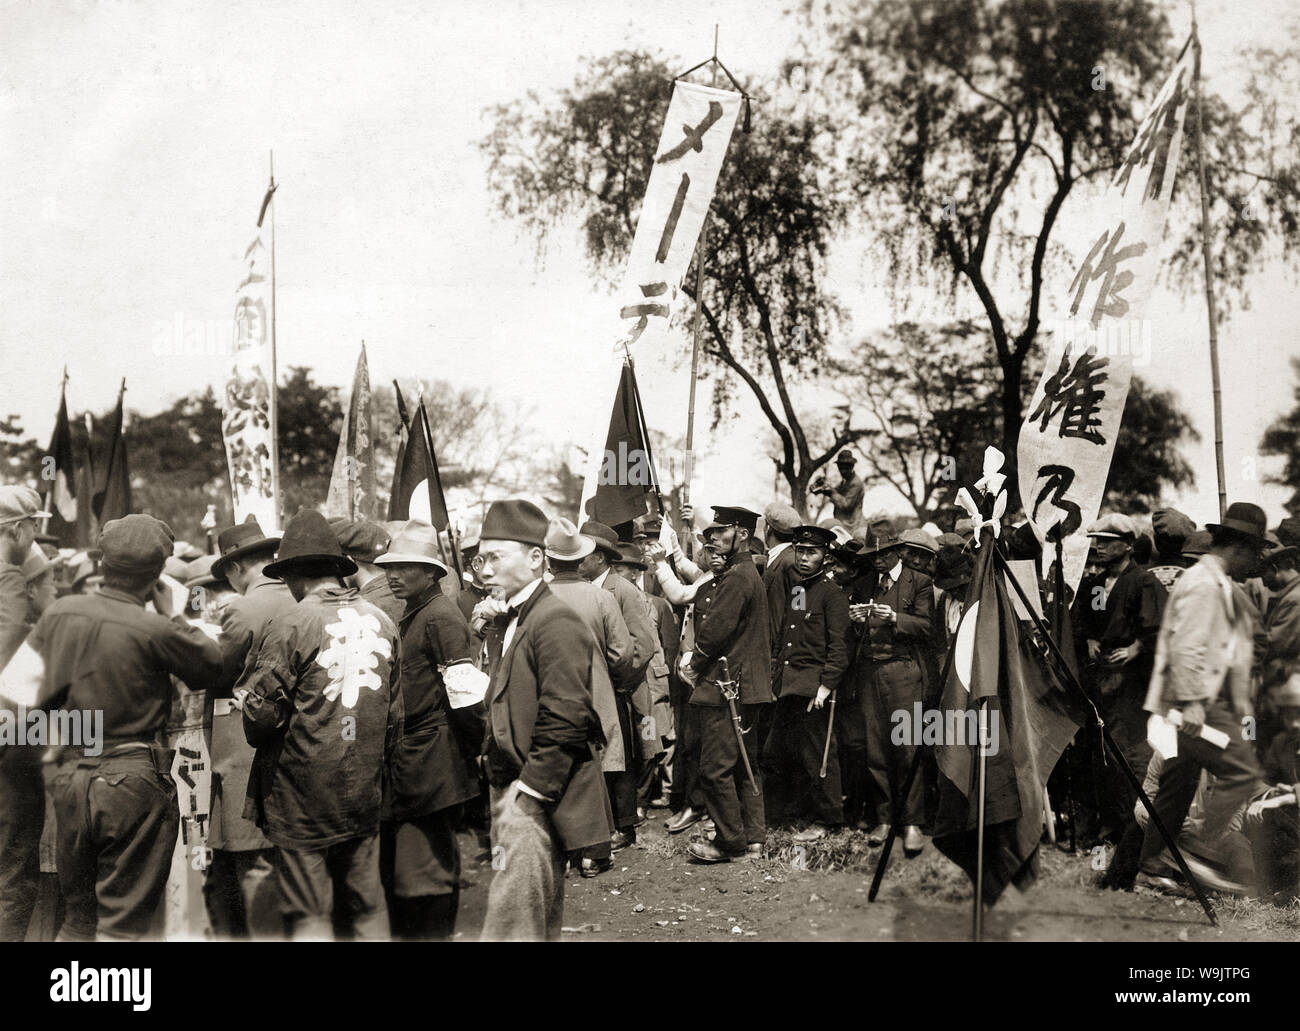 [ 1920s Japan - Japanesse May Day Demonstration ] —   Protestors and police officers at a May Day demonstration.  20th century vintage gelatin silver print. Stock Photo